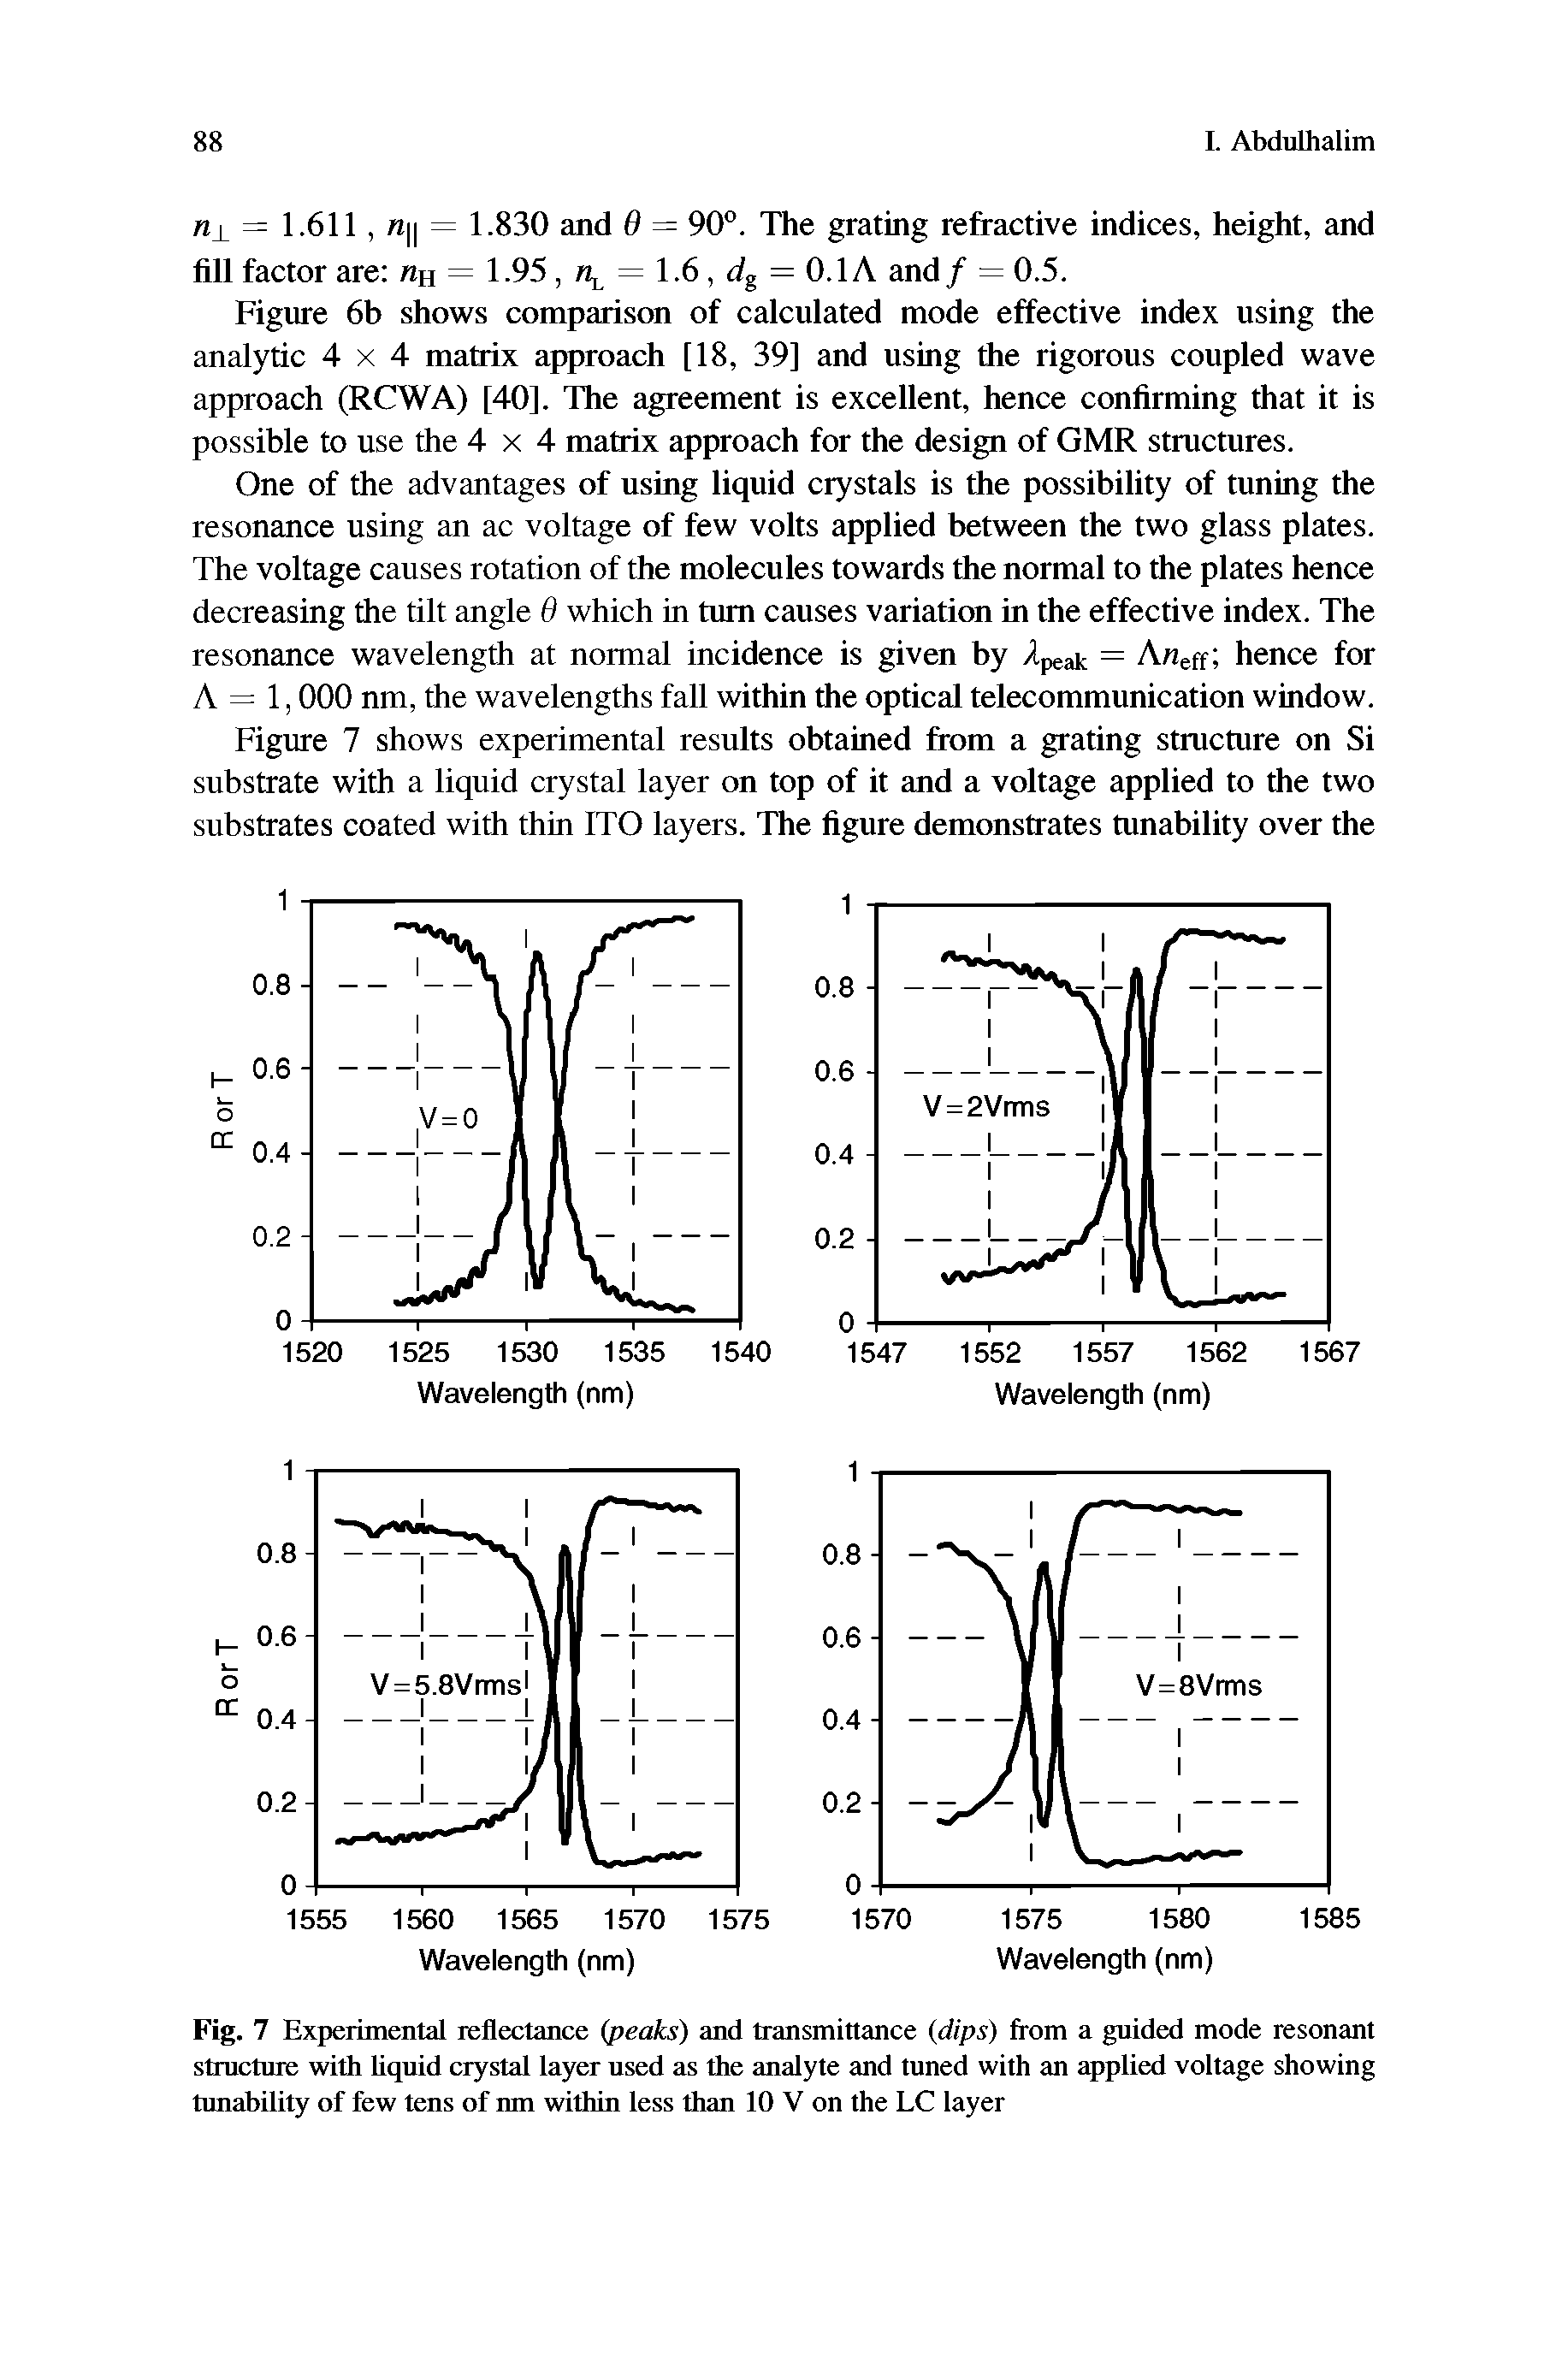 Fig. 7 Experimental reflectance (peaks) and transmittance (dips) from a guided mode resonant structure with liquid crystal layer used as the analyte and tuned with an applied voltage showing tunability of few tens of nm within less than 10 V on the LC layer...